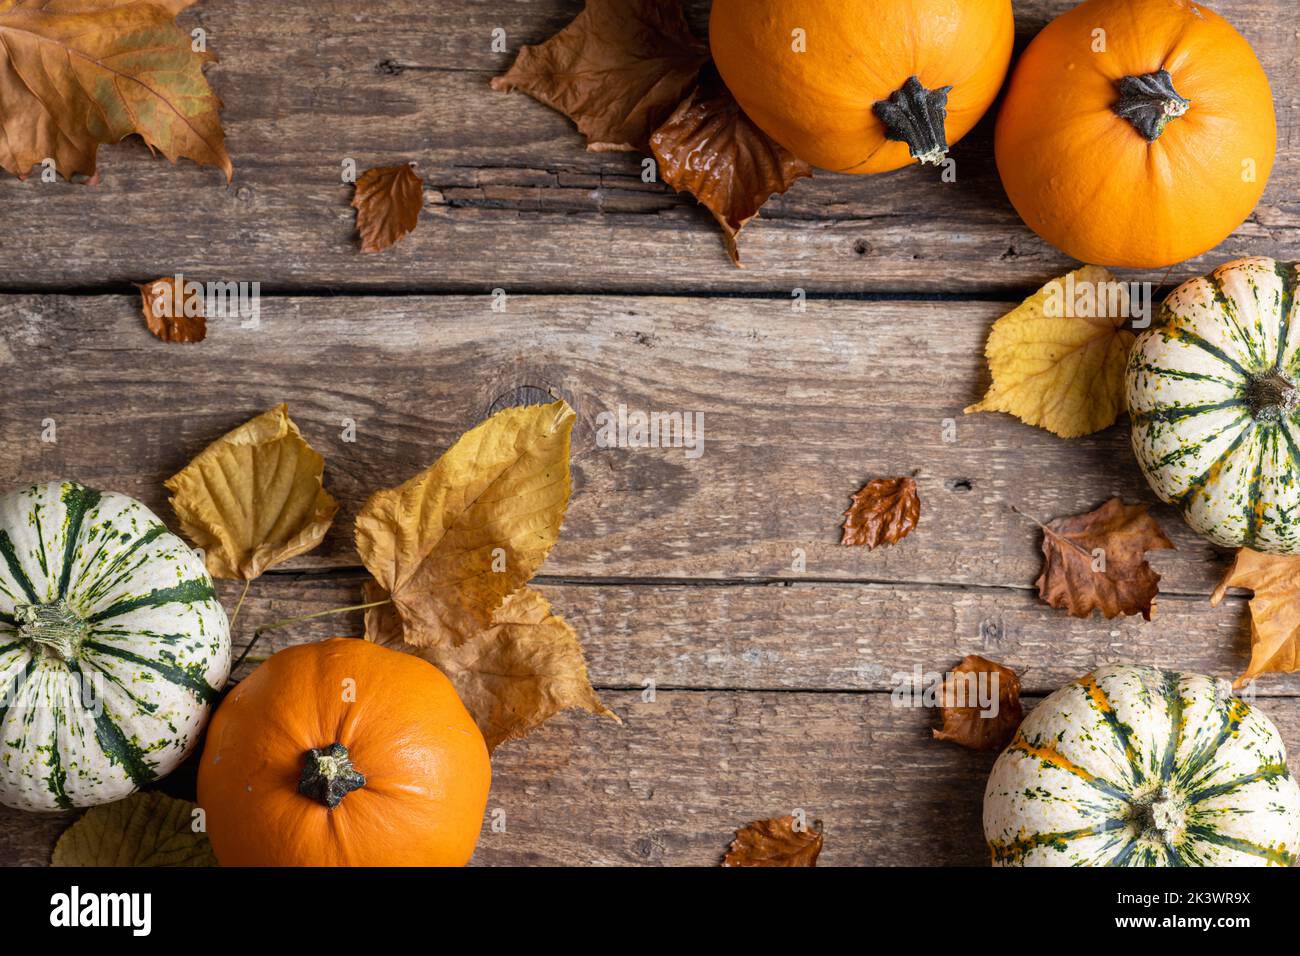 Autumn background with pumpkins and autumn leaves on rustic wooden background. Concept of Thanksgiving day or Halloween. Flat lay autumn composition w Stock Photo